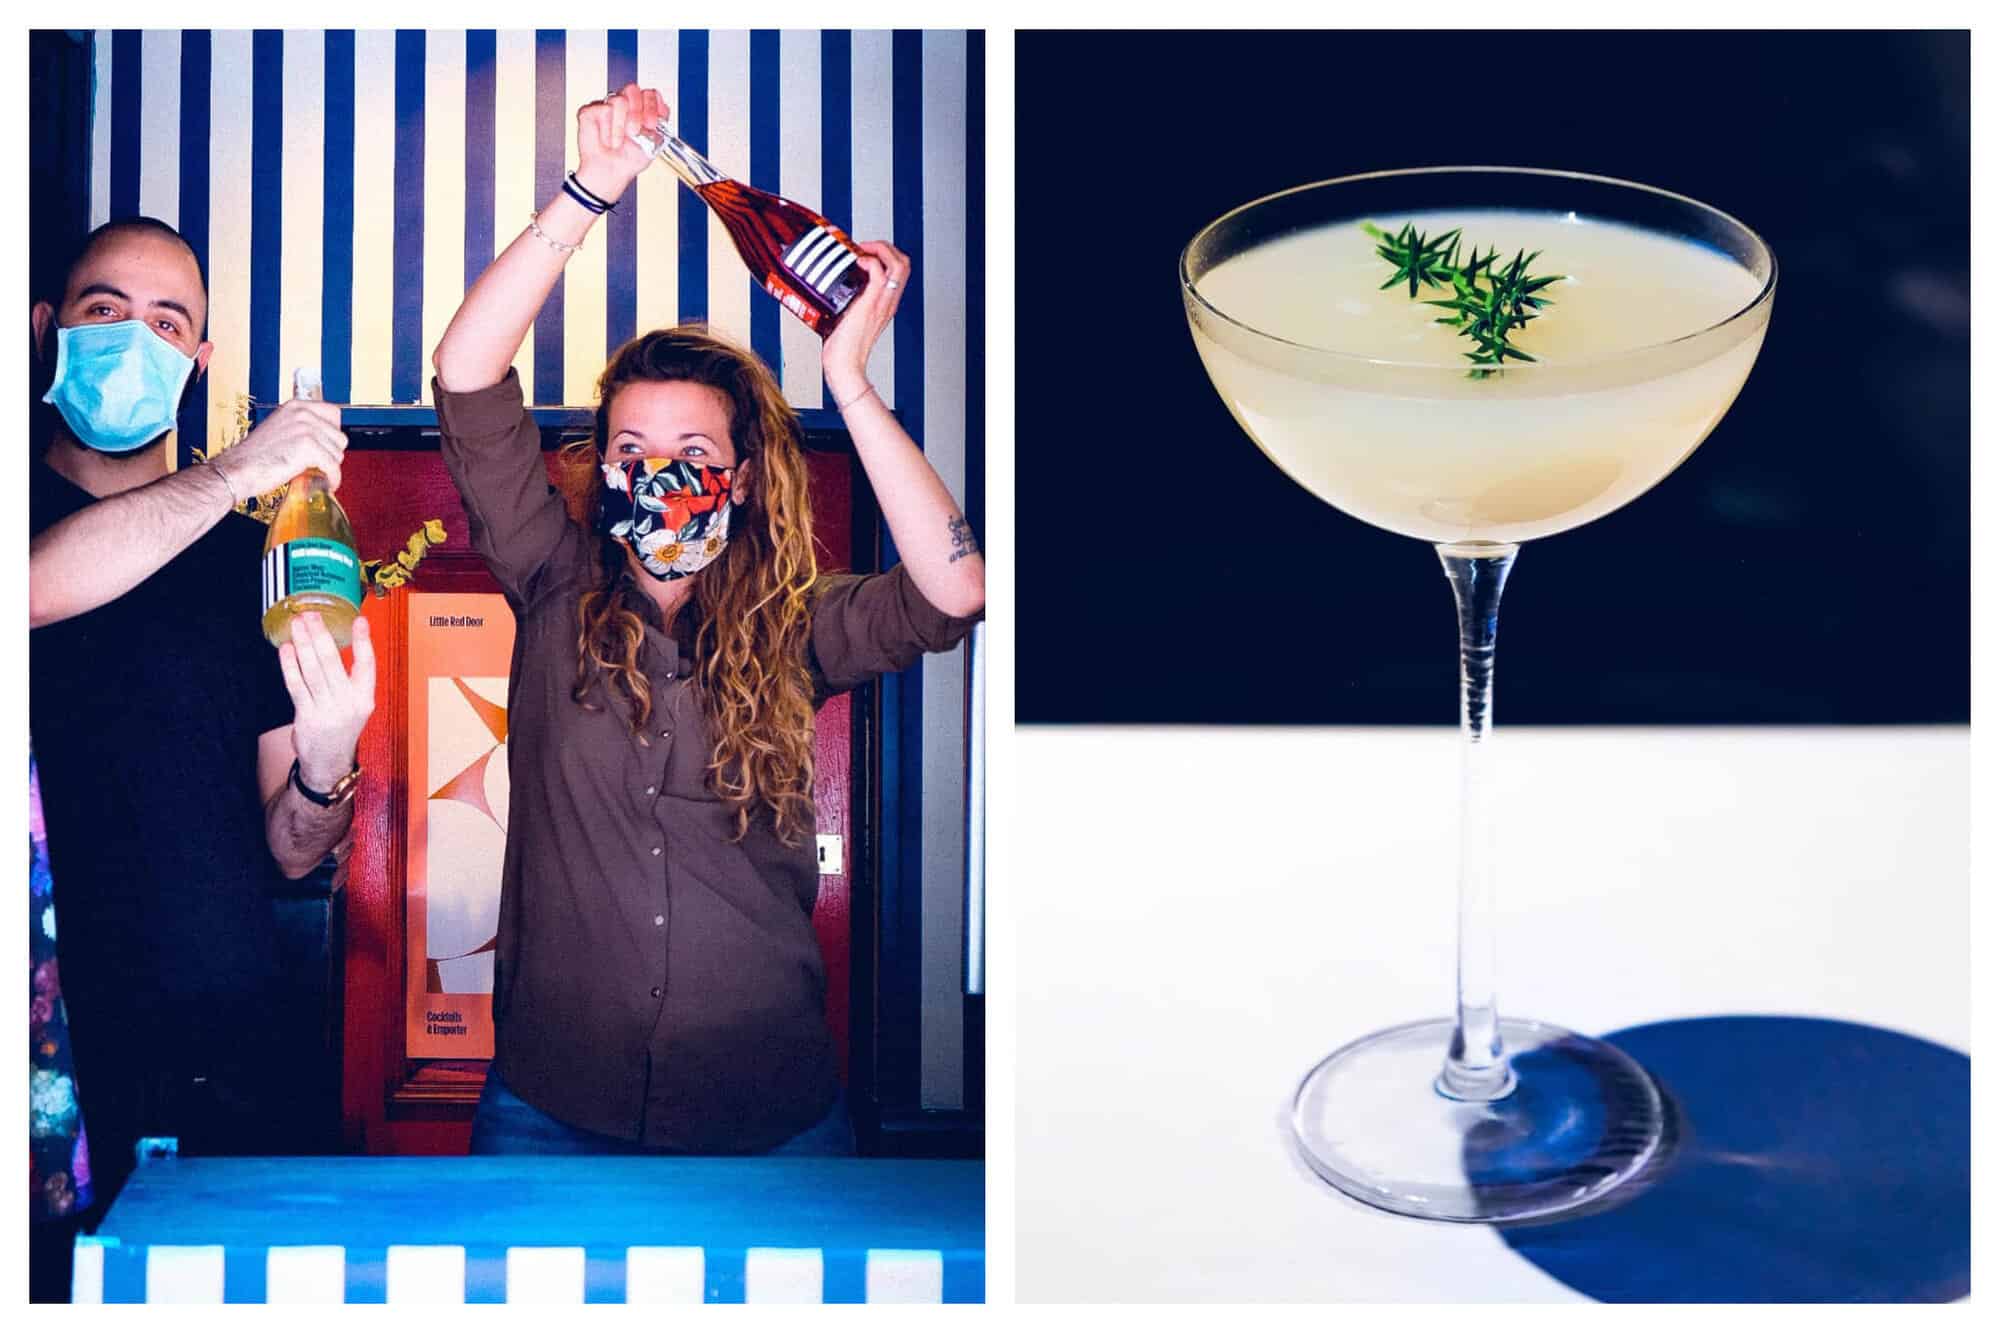 Left: two bartenders at the bar in Paris called "Little Red Door." They both have face masks on and are holding bottles of wine up. The wall behind them is blue and white striped. Right: A cream colored cocktail with a sprig of greenery in it on a white table. The background is dark blue.